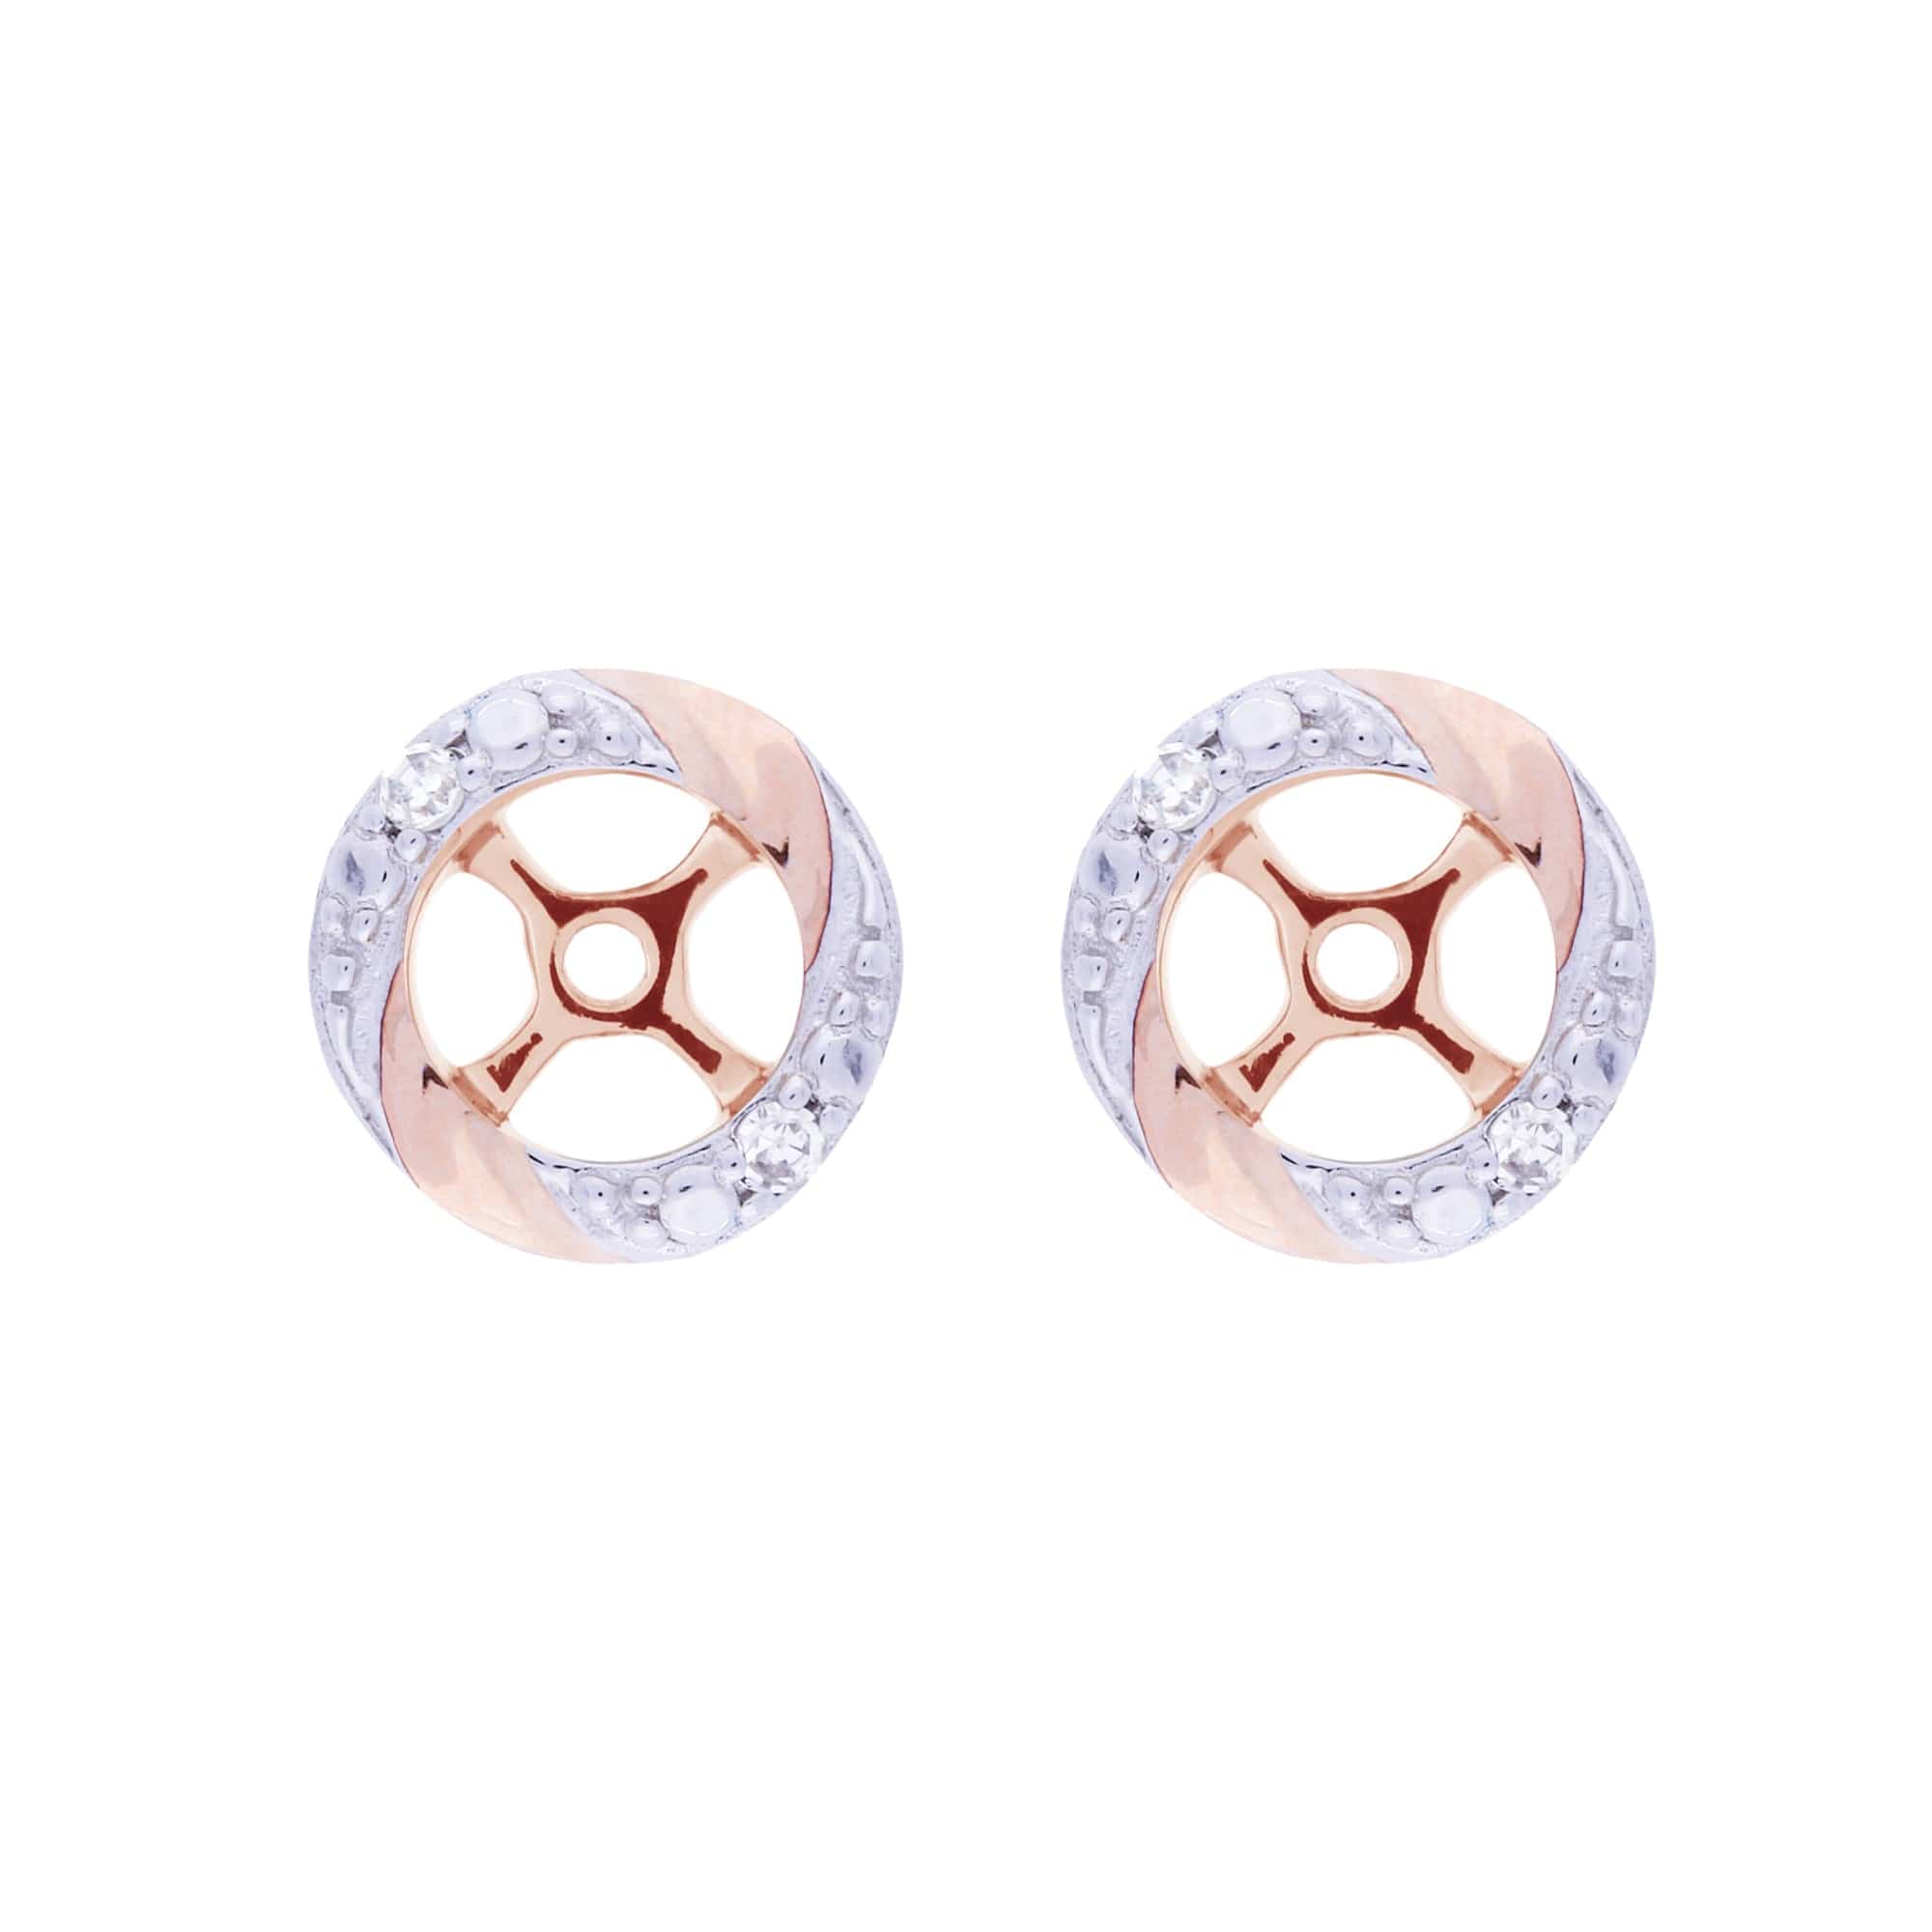 Classic Round Ruby Stud Earrings with Detachable Diamond Round Earrings Jacket Set in 9ct Rose Gold - Gemondo